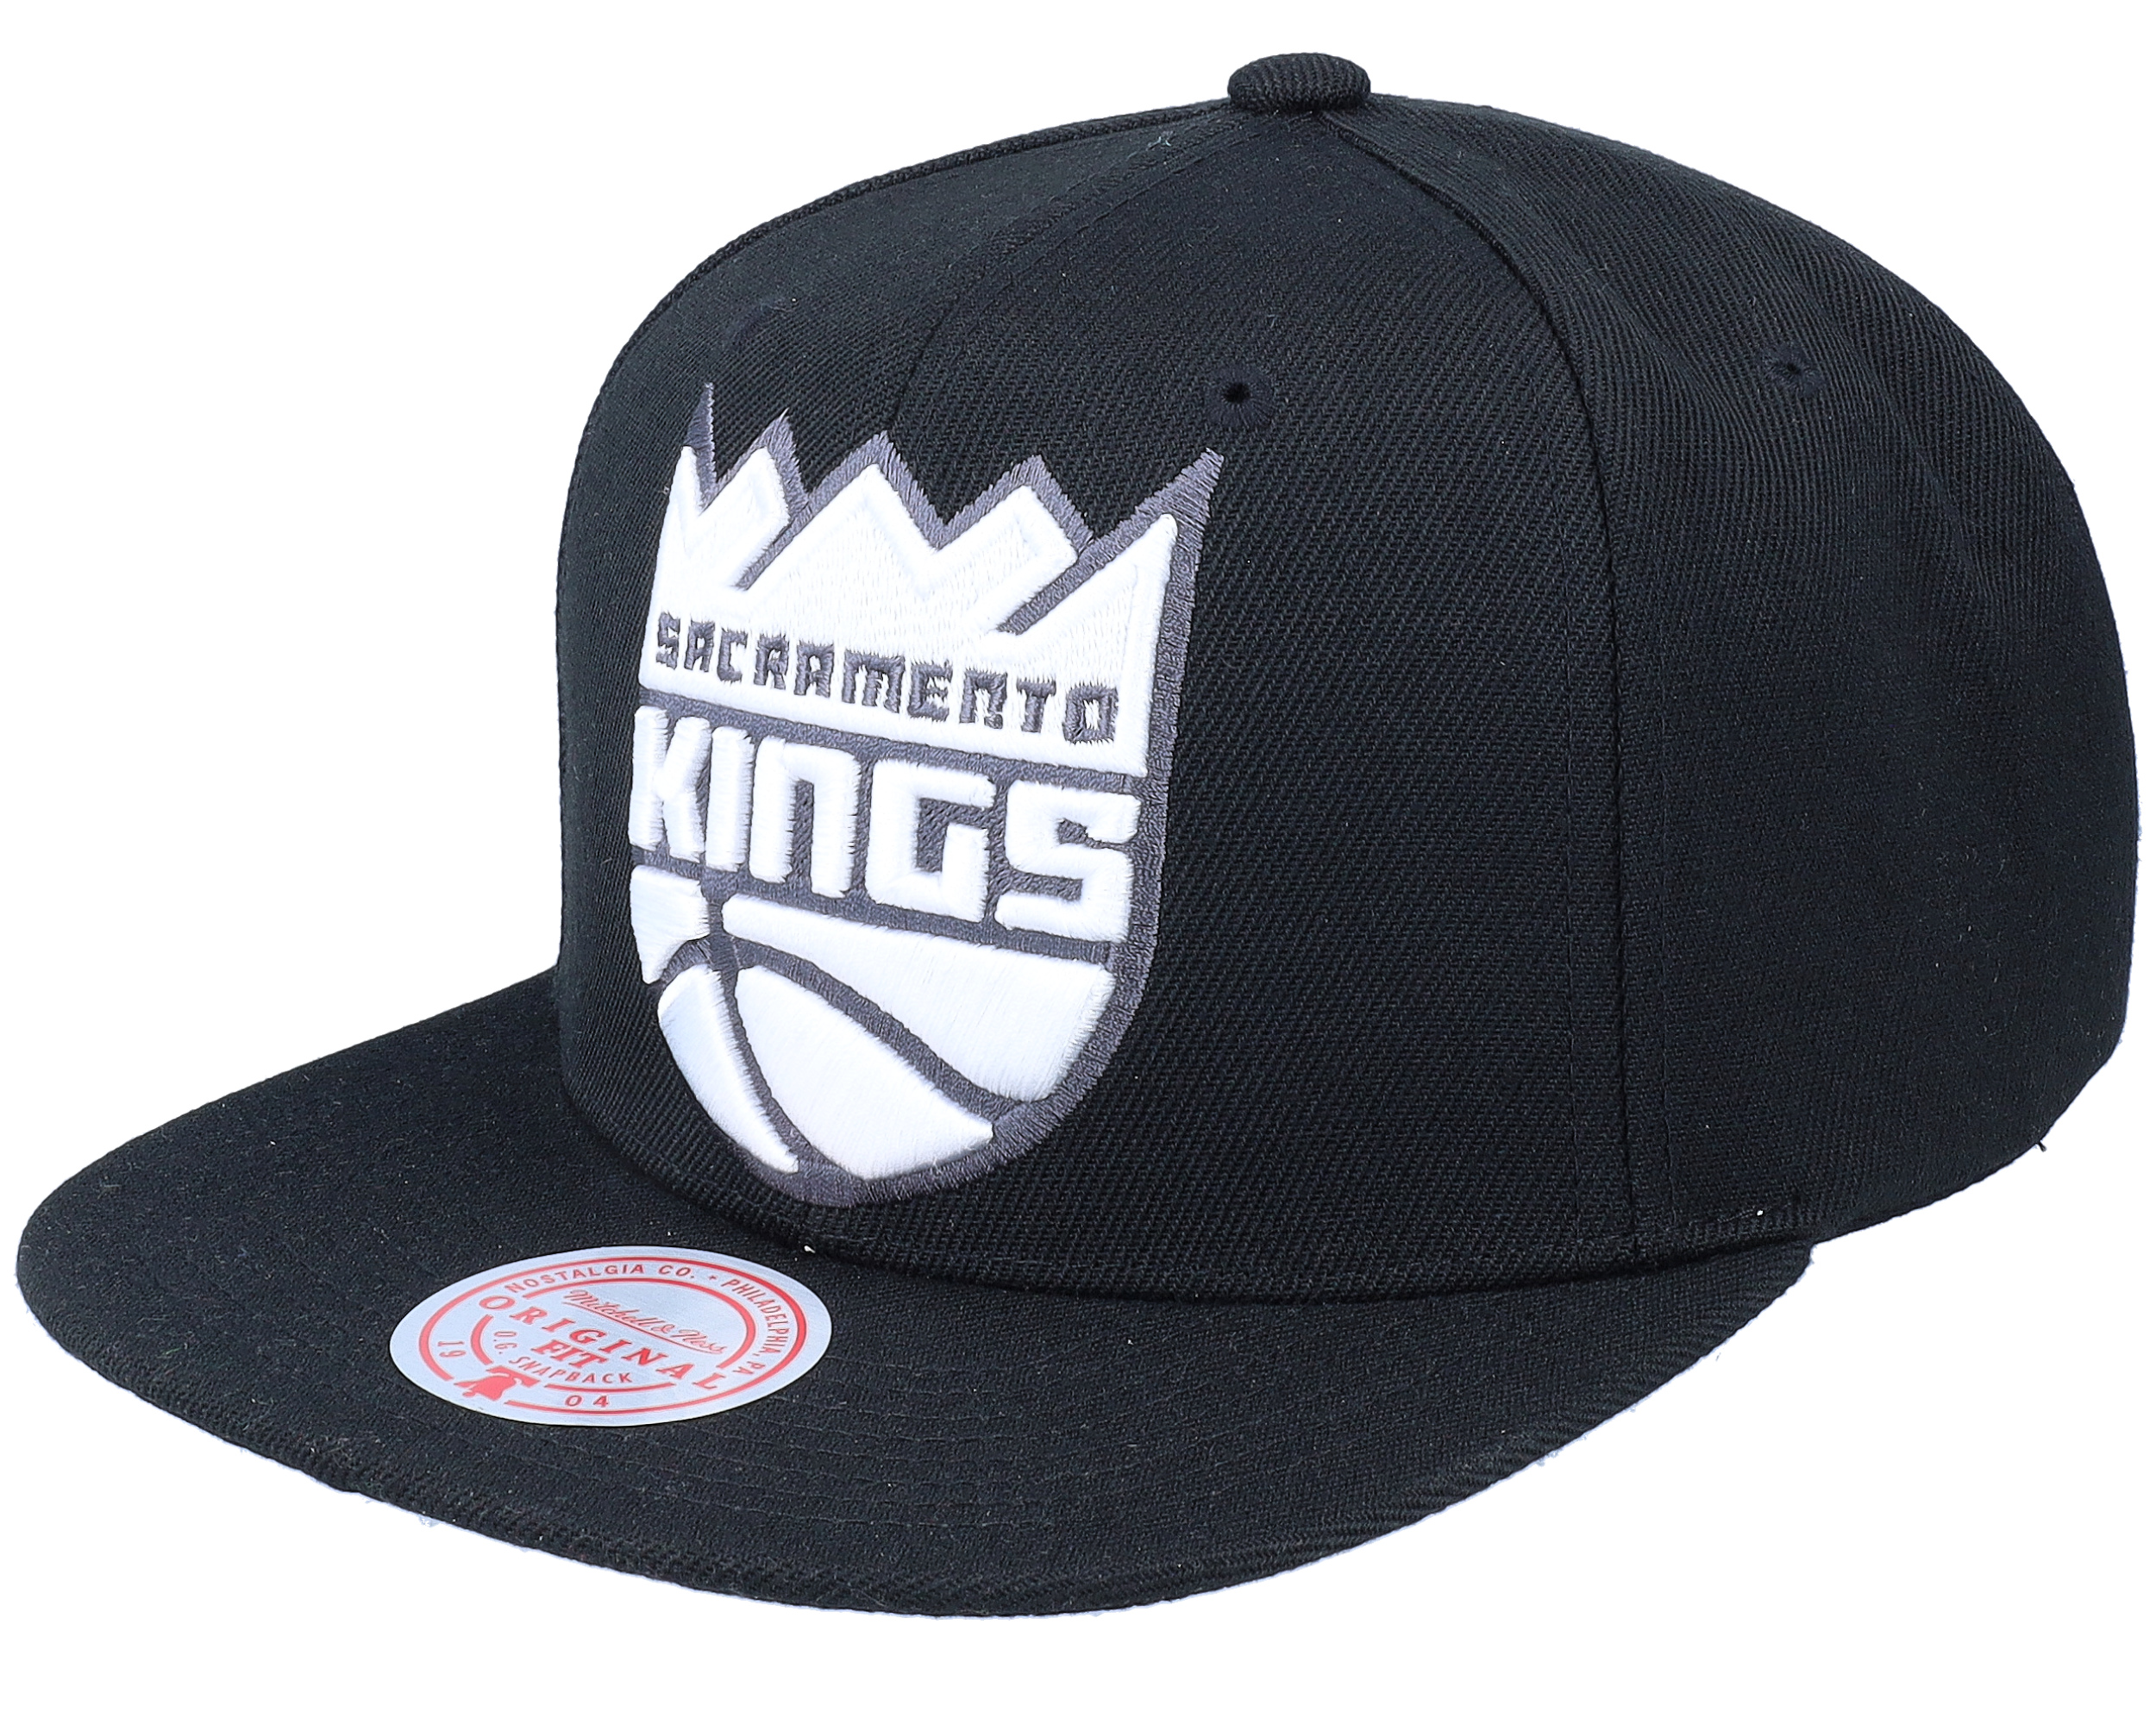 Men Sacramento Kings Fitted Hat Cap Basketball Mitchell & Ness 